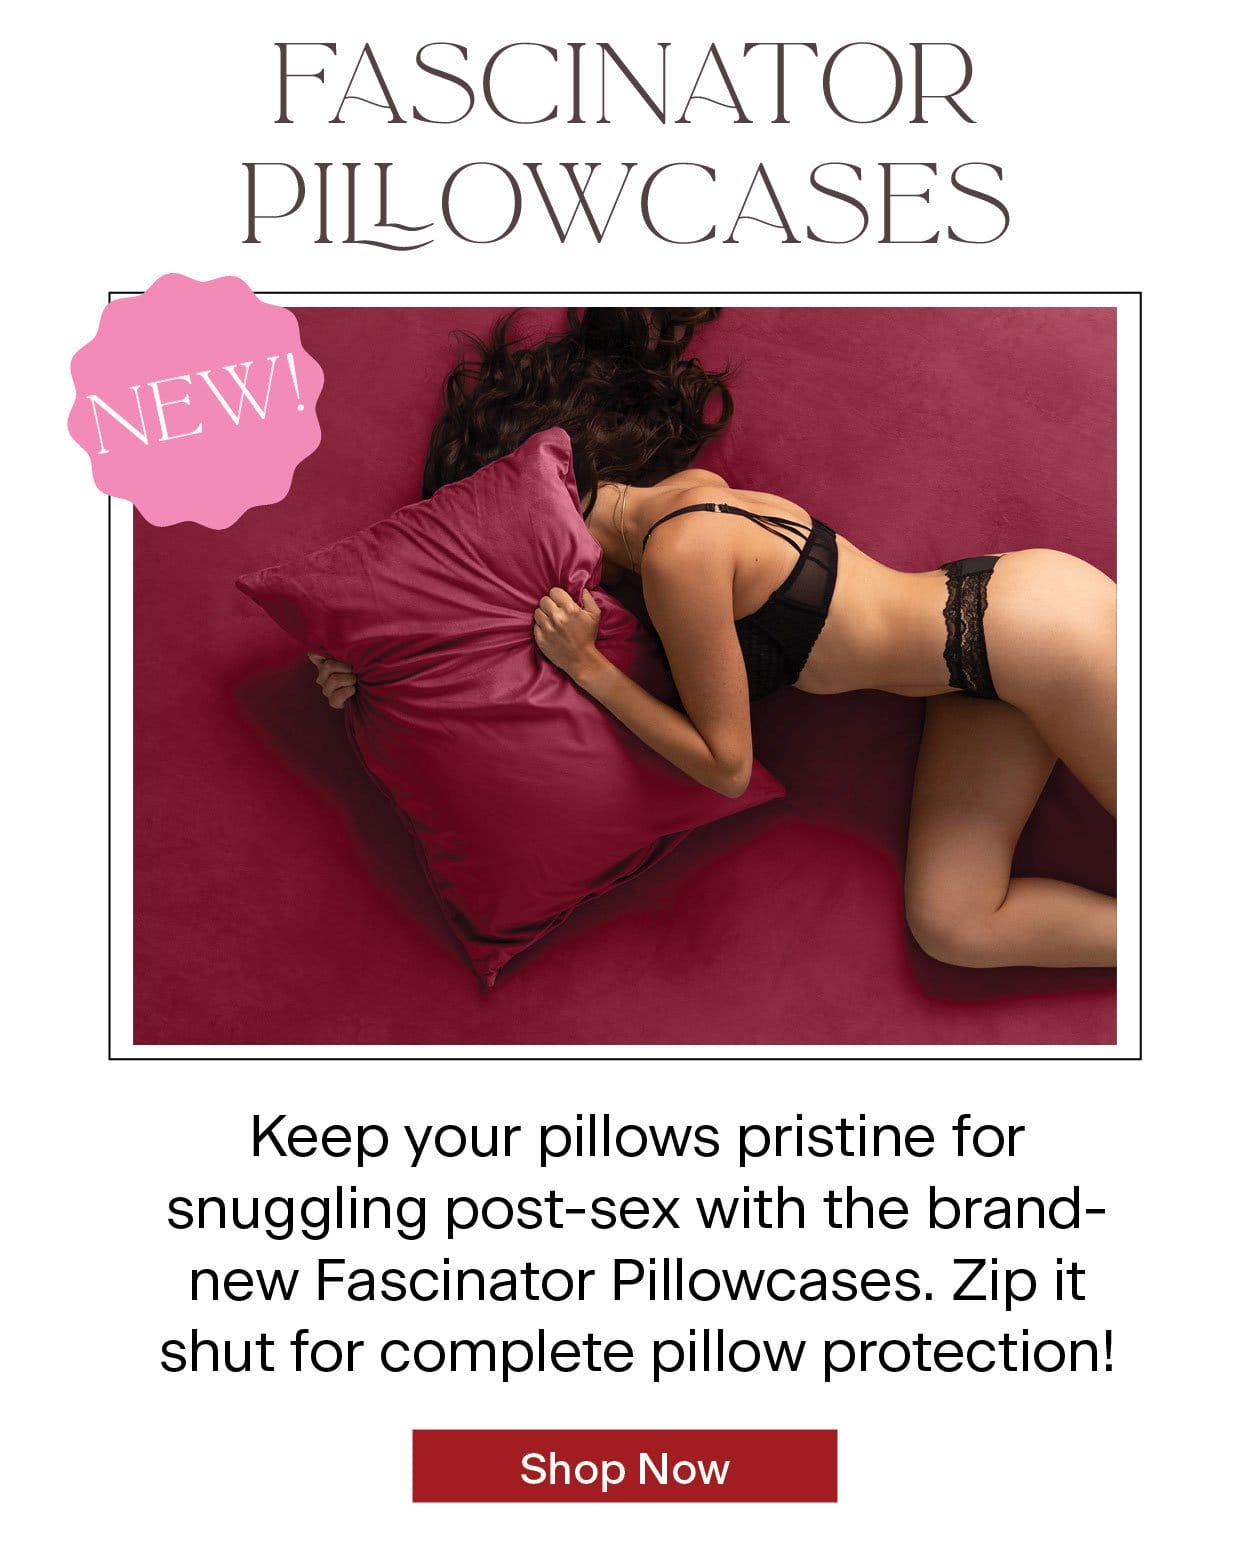 Fascinator Pillowcases | Keep your pillows pristine for snuggling post-sex with the brand-new Fascinator Pillowcases. Zip it shut for complete pillow protection! Shop Now